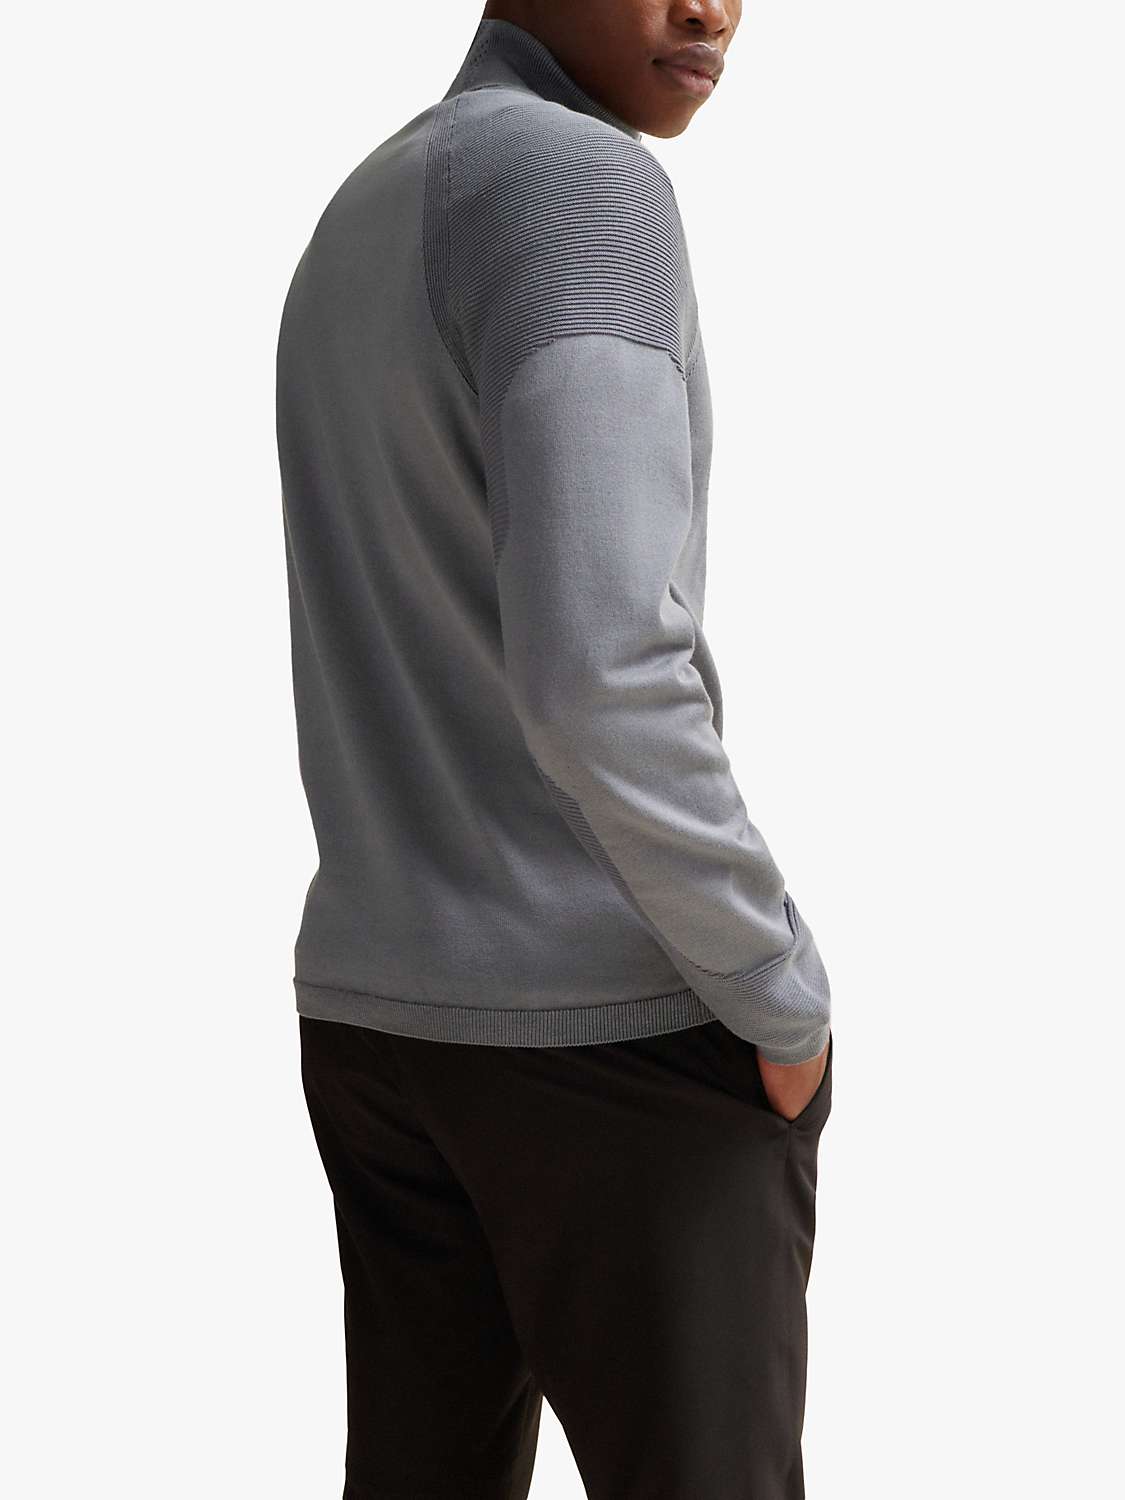 Buy BOSS Perform-X Thermo-Flex Bi-Cotton Knitted Jumper, Grey Online at johnlewis.com